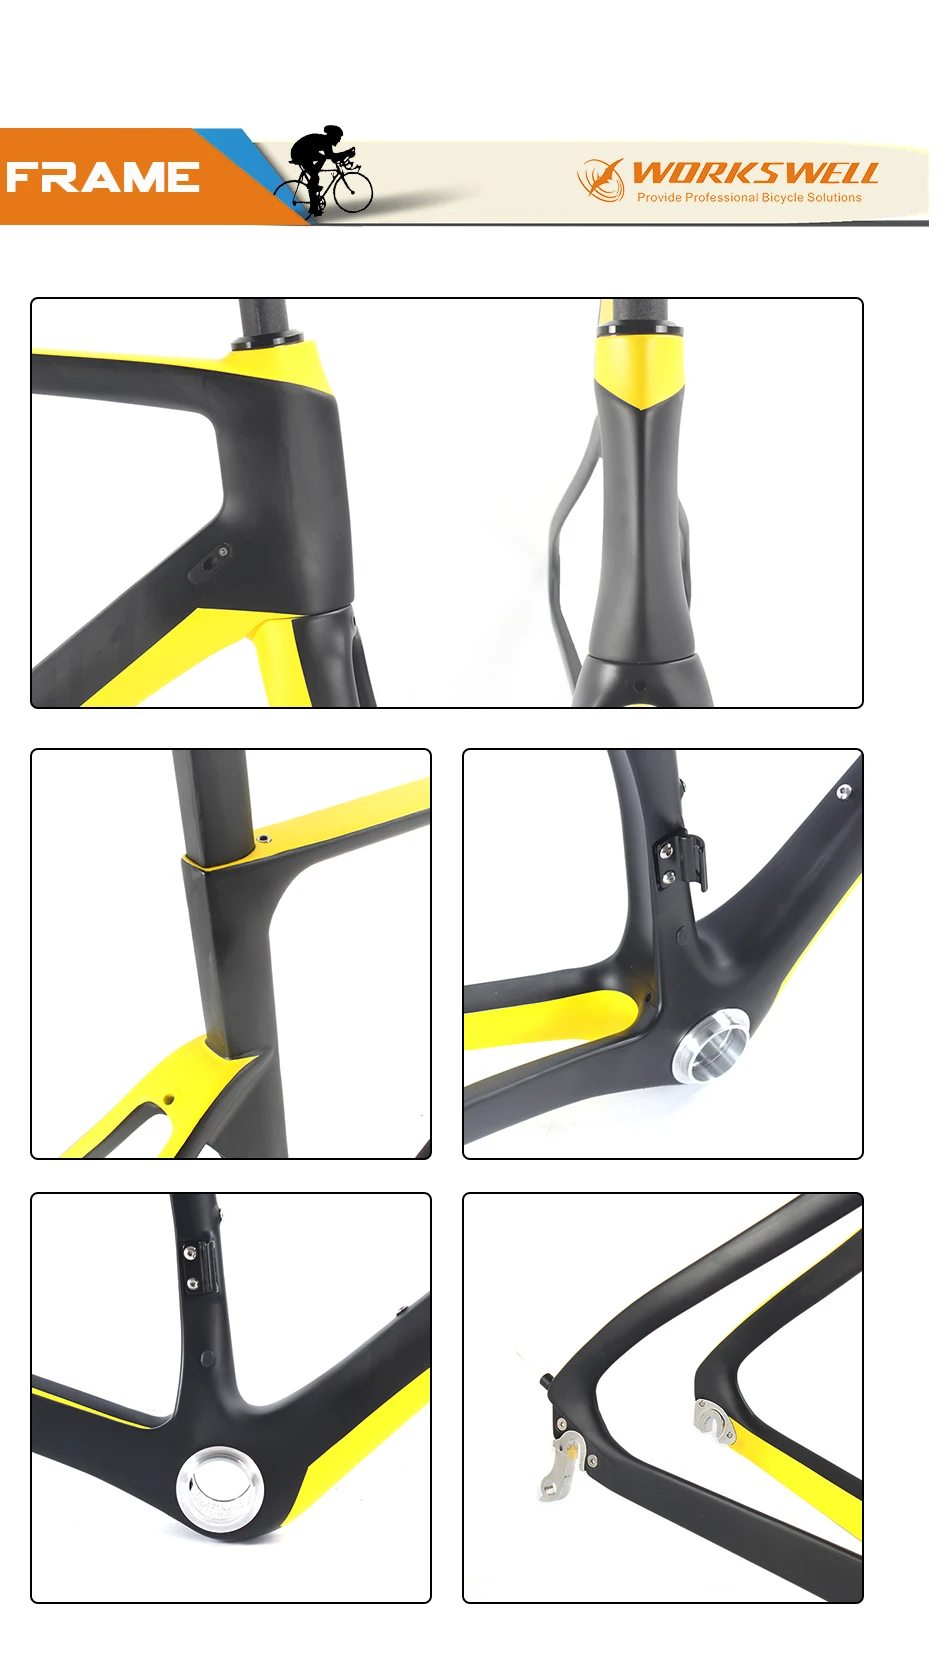 Perfect WORKSWELL  Frame Carbon Road 2017 Bicycle Quadro de Bicicleta Chinese Road racing frame thru axle 5